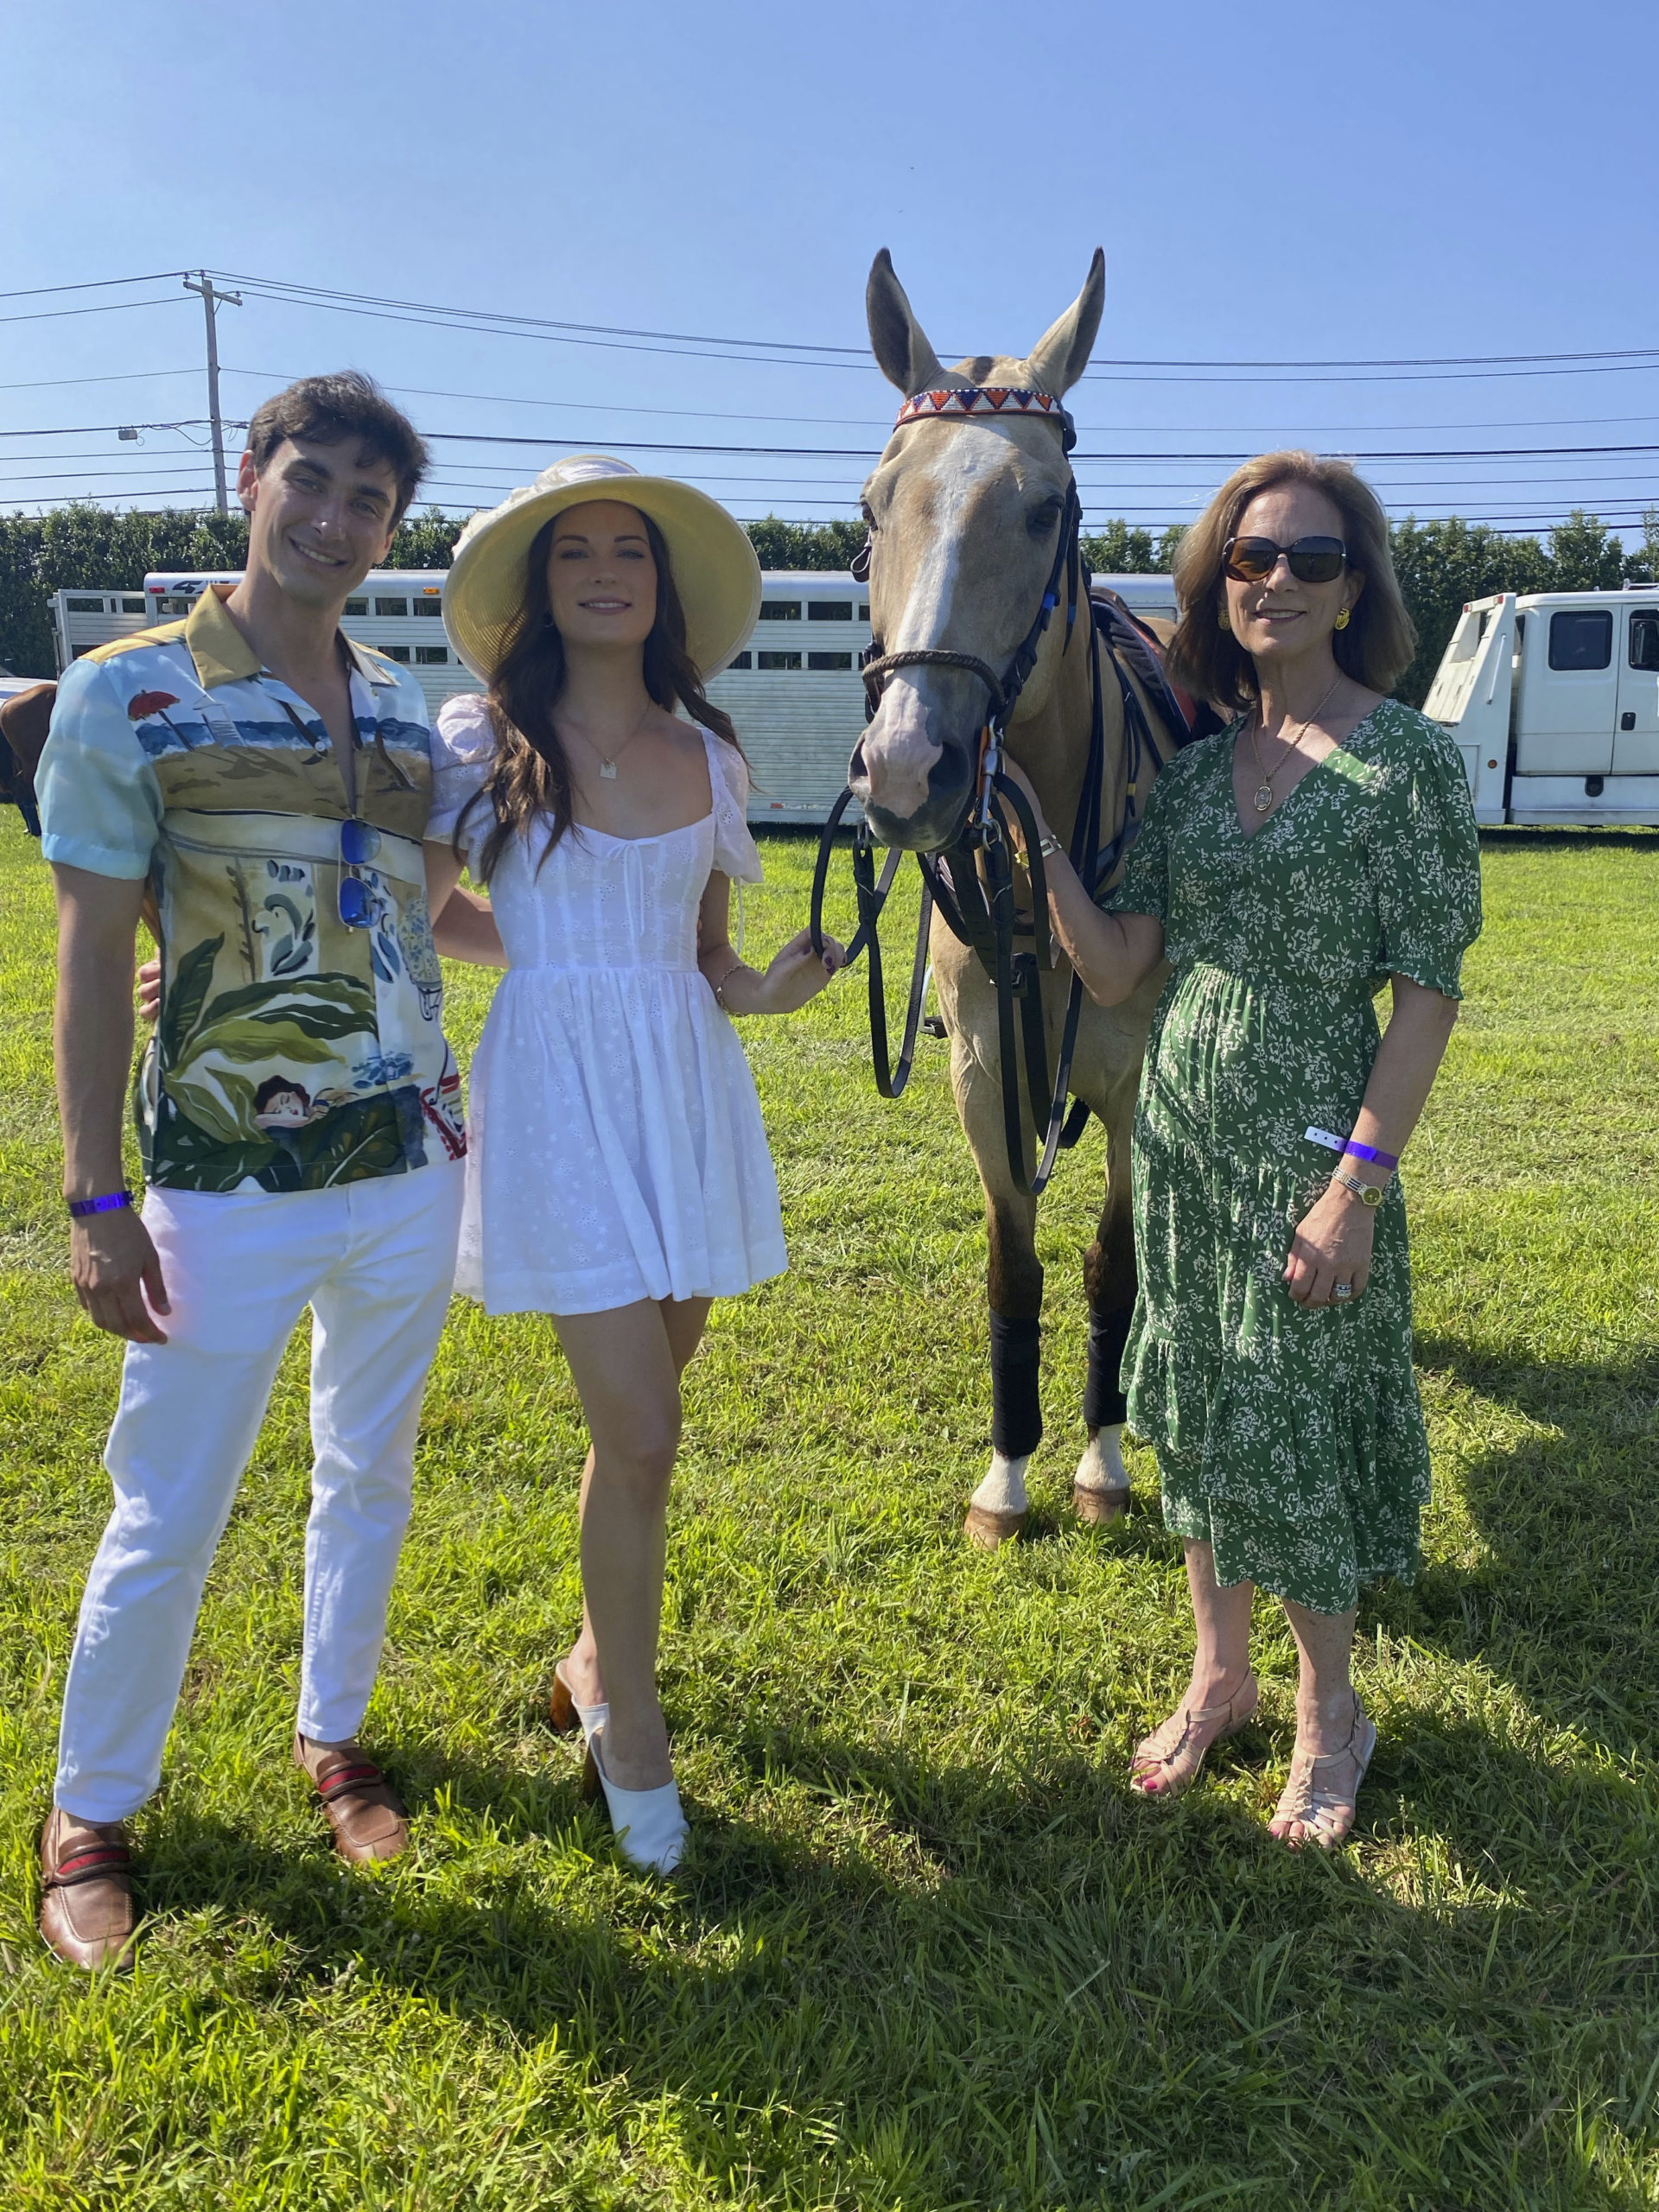 Bardley Fishel with Vivian and Paige Louthan with Caramello one of the polo ponies.   GREG DELIA